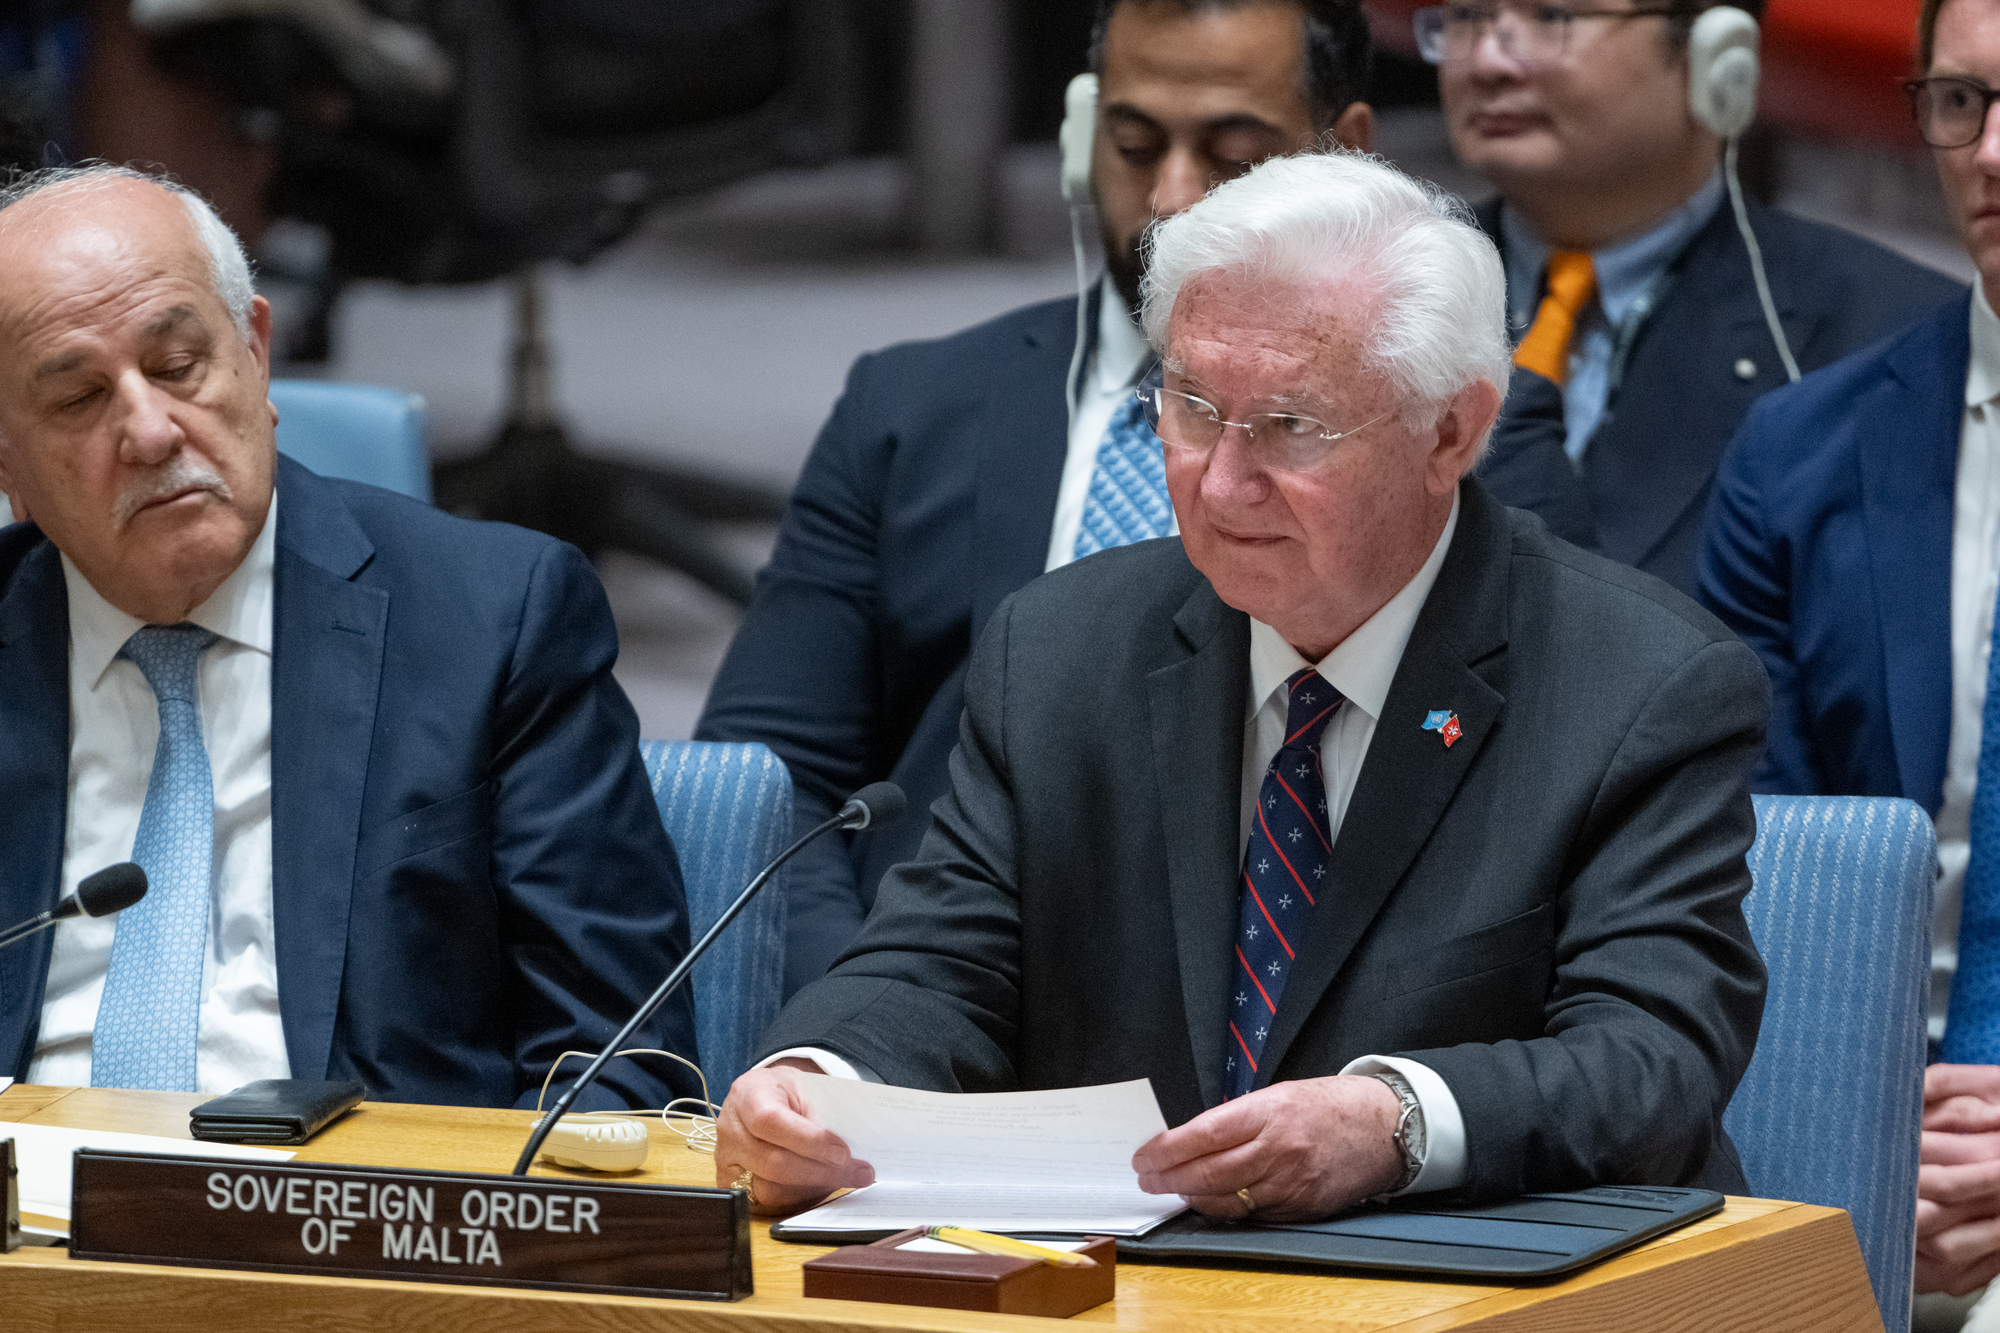 The Ambassador of the Order of Malta to the United Nations addresses the Security Council